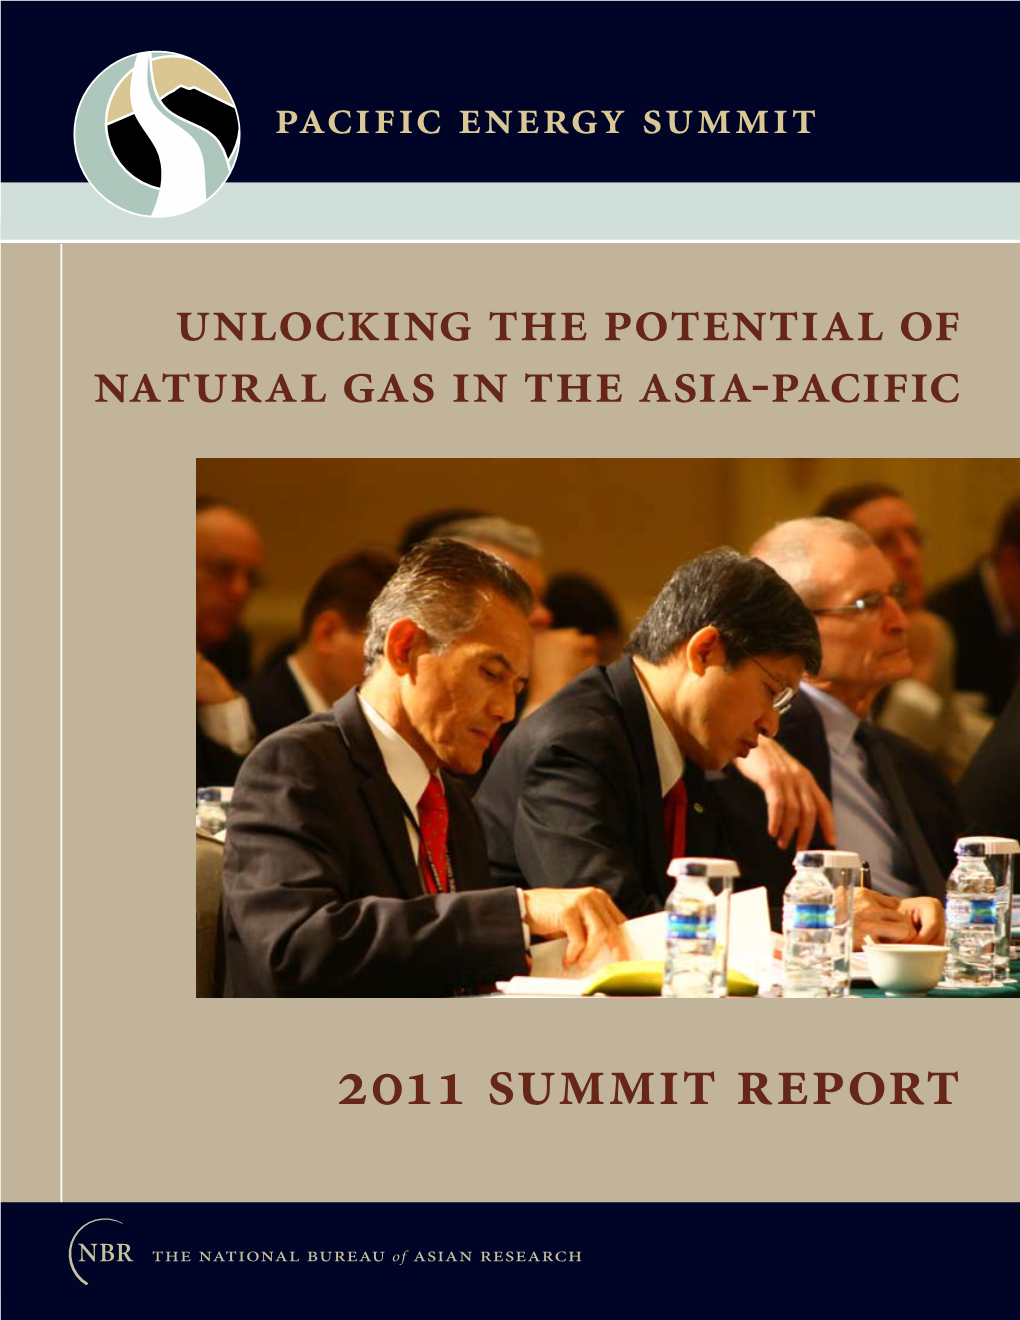 2011 Summit Report the National Bureau of Asian Research Is a Nonprofit, Nonpartisan Research Institution Dedicated to Informing and Strengthening Policy